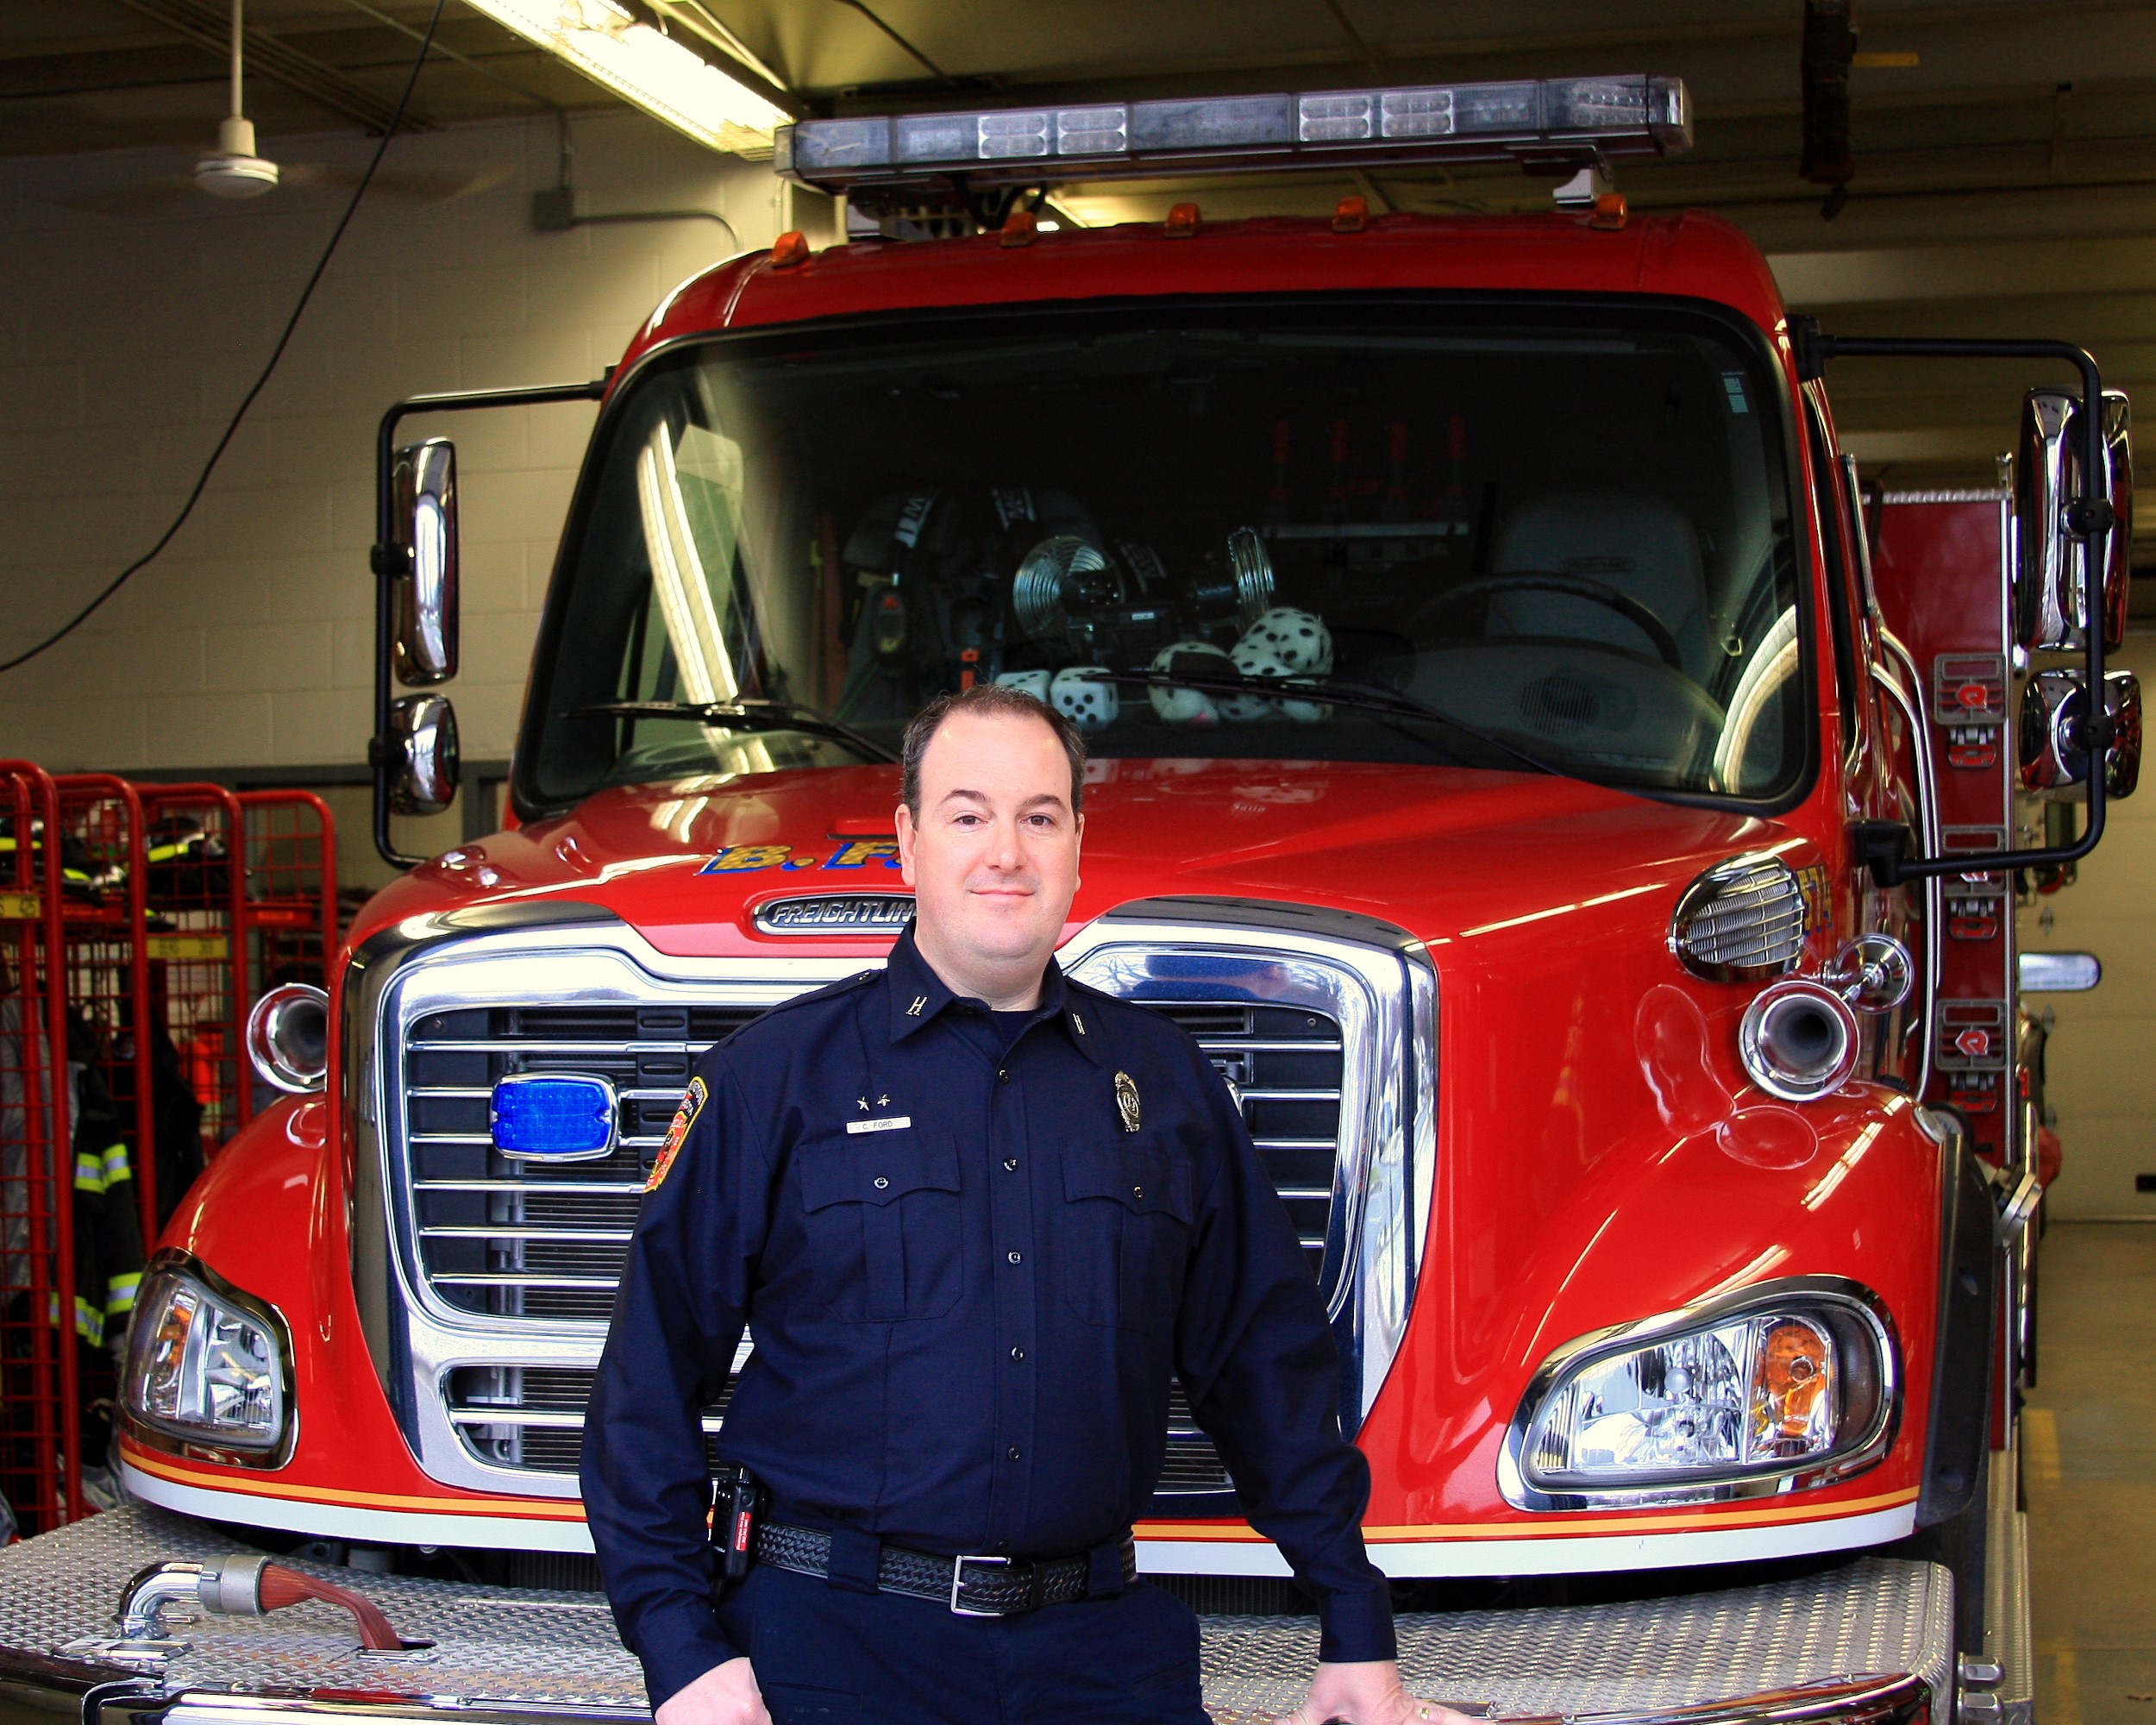 Chad Ford stands in front of engine #4 at Bloomington Fire House #4.